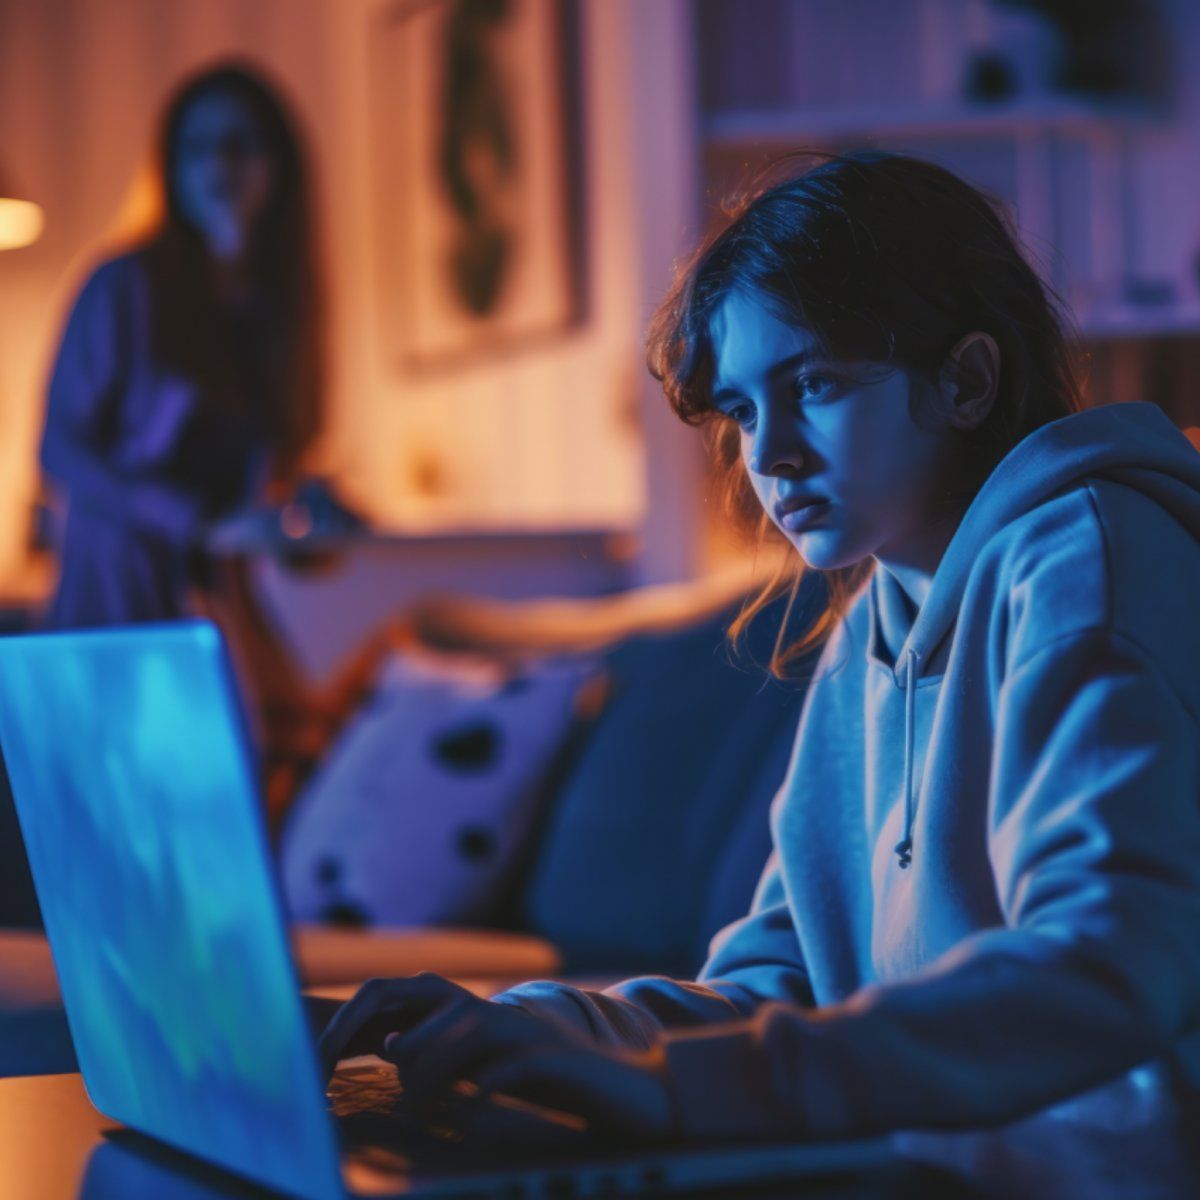 Girl looking worried at her laptop while mom watches in the distance